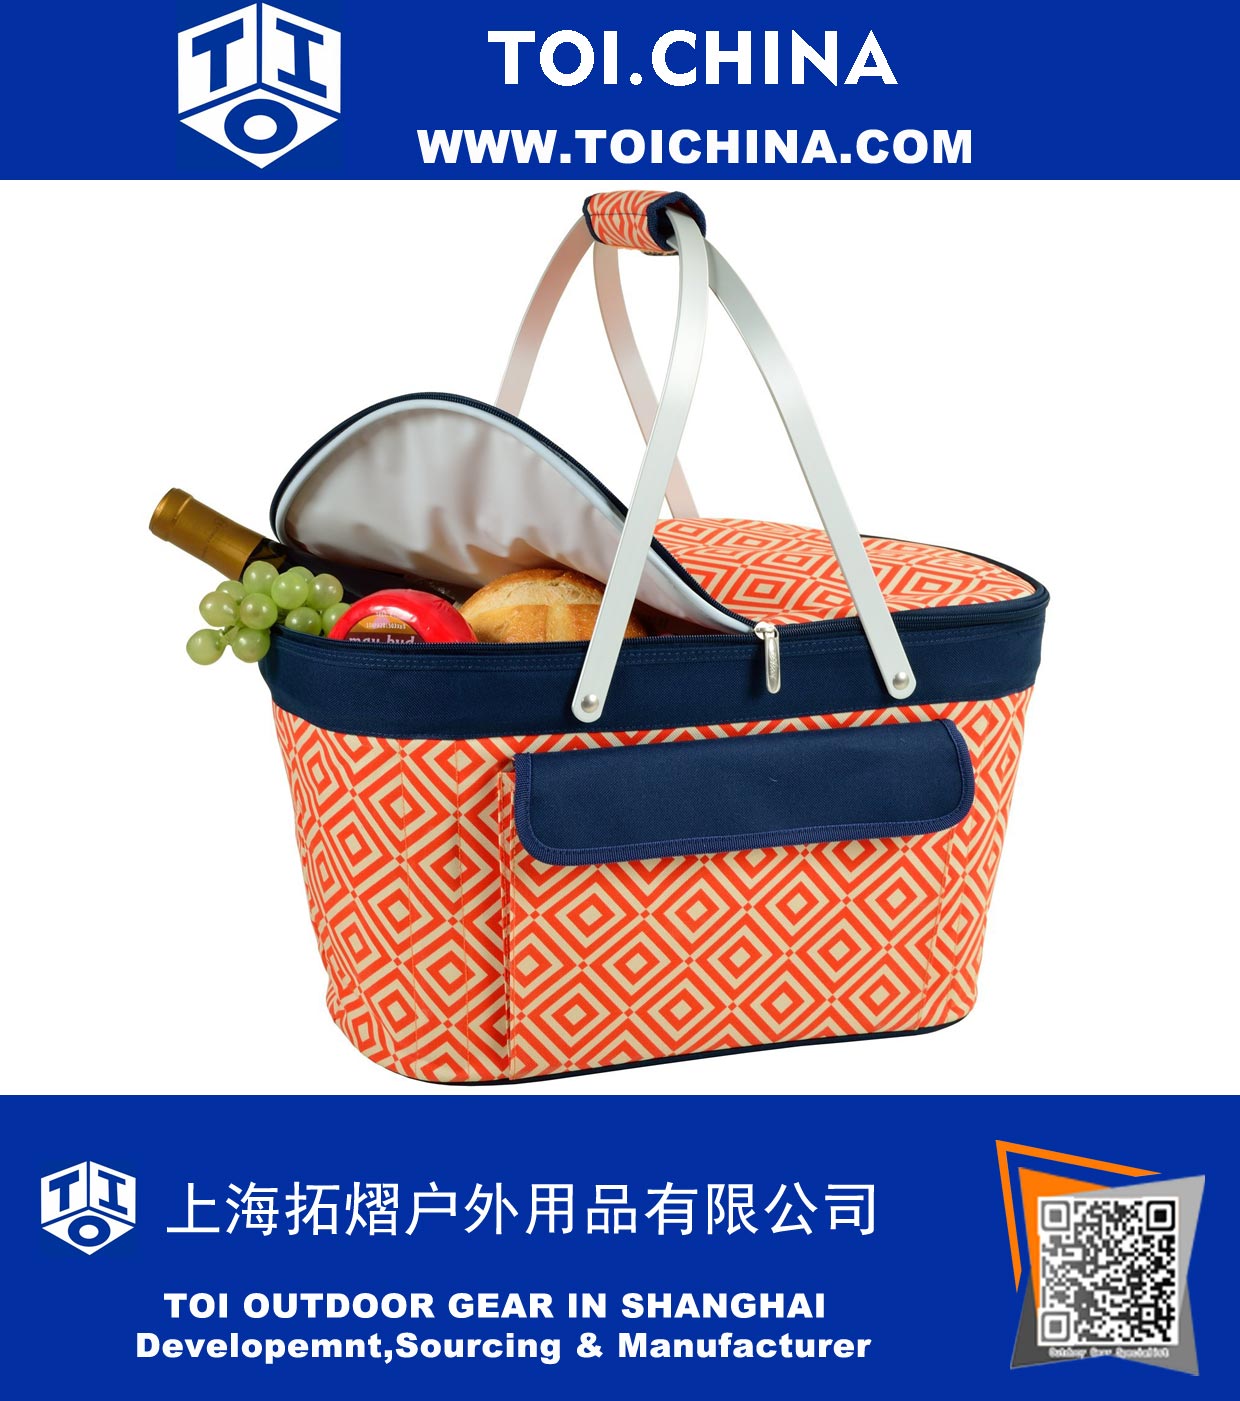 Large Family Size Insulated Folding Collapsible Picnic Basket Cooler with Sewn in Frame